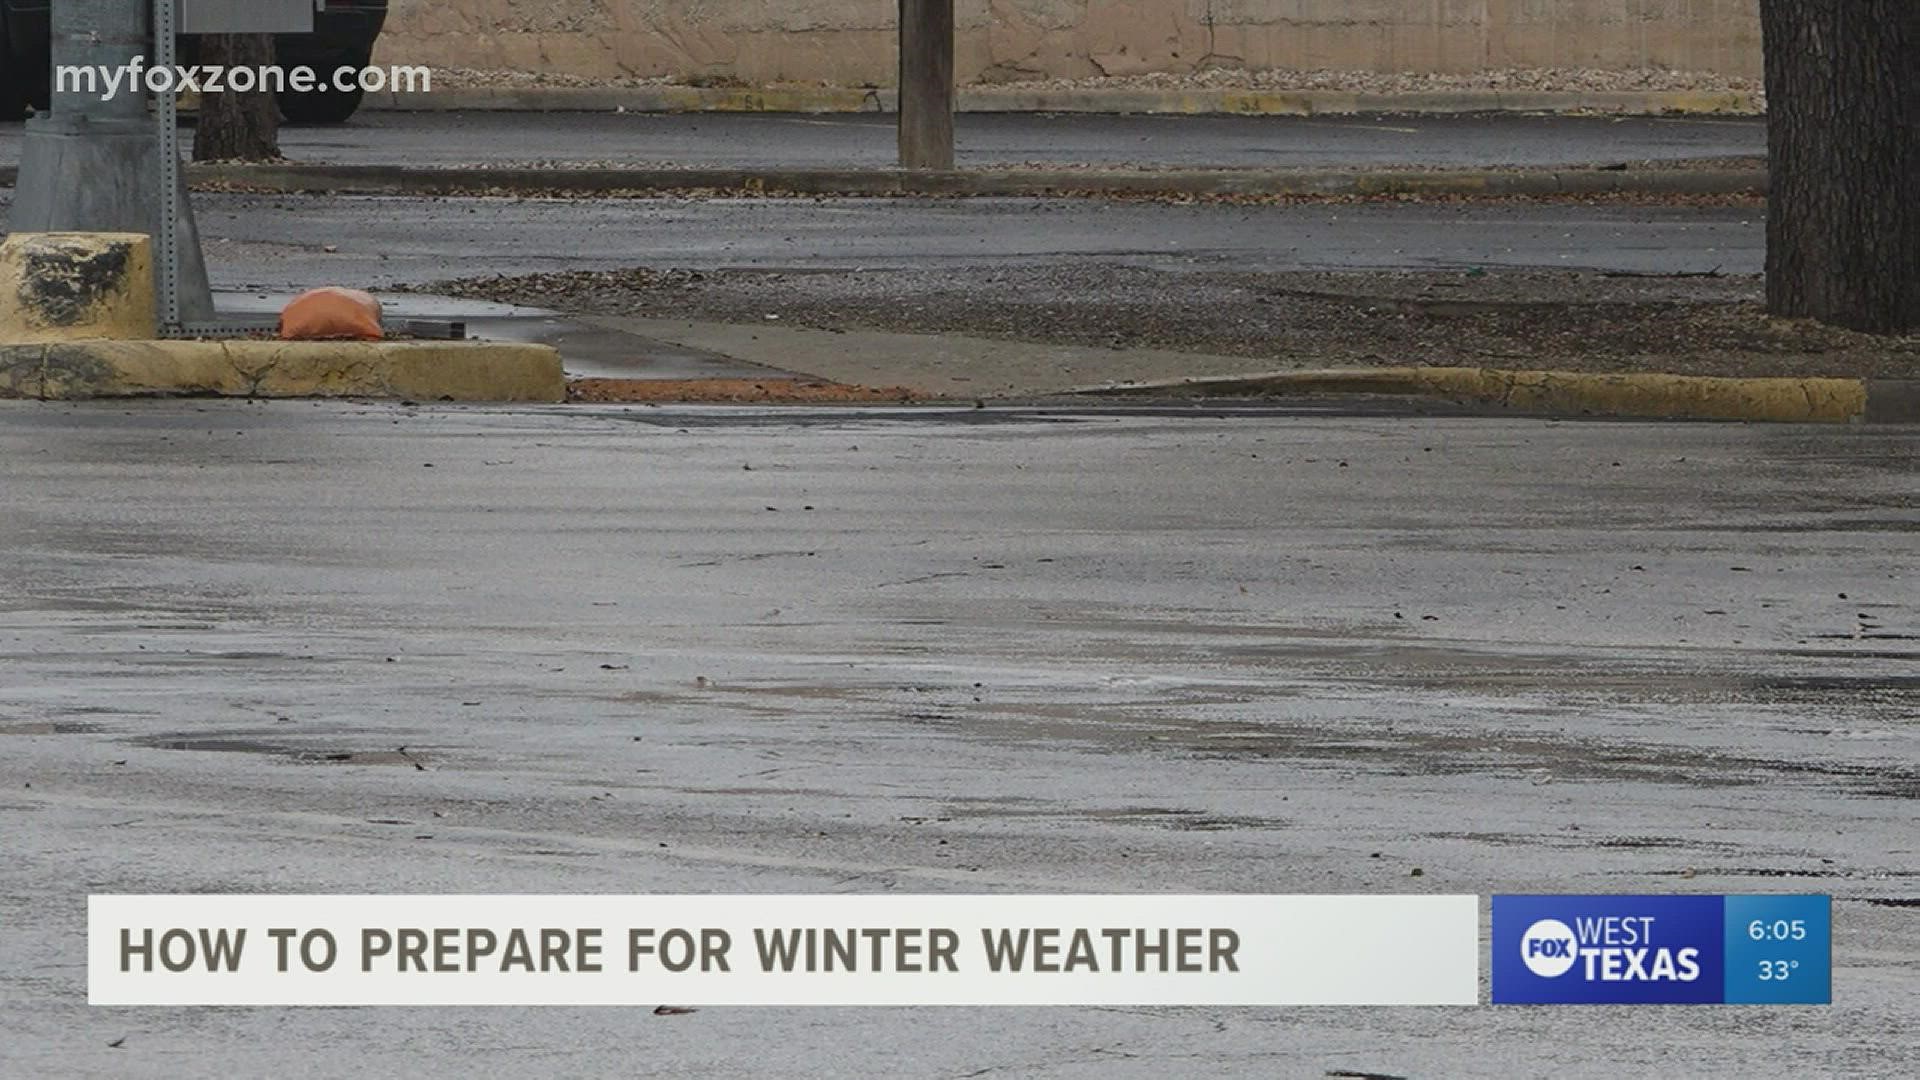 Local emergency management coordinator advises the community to prepare for anticipated weather conditions.